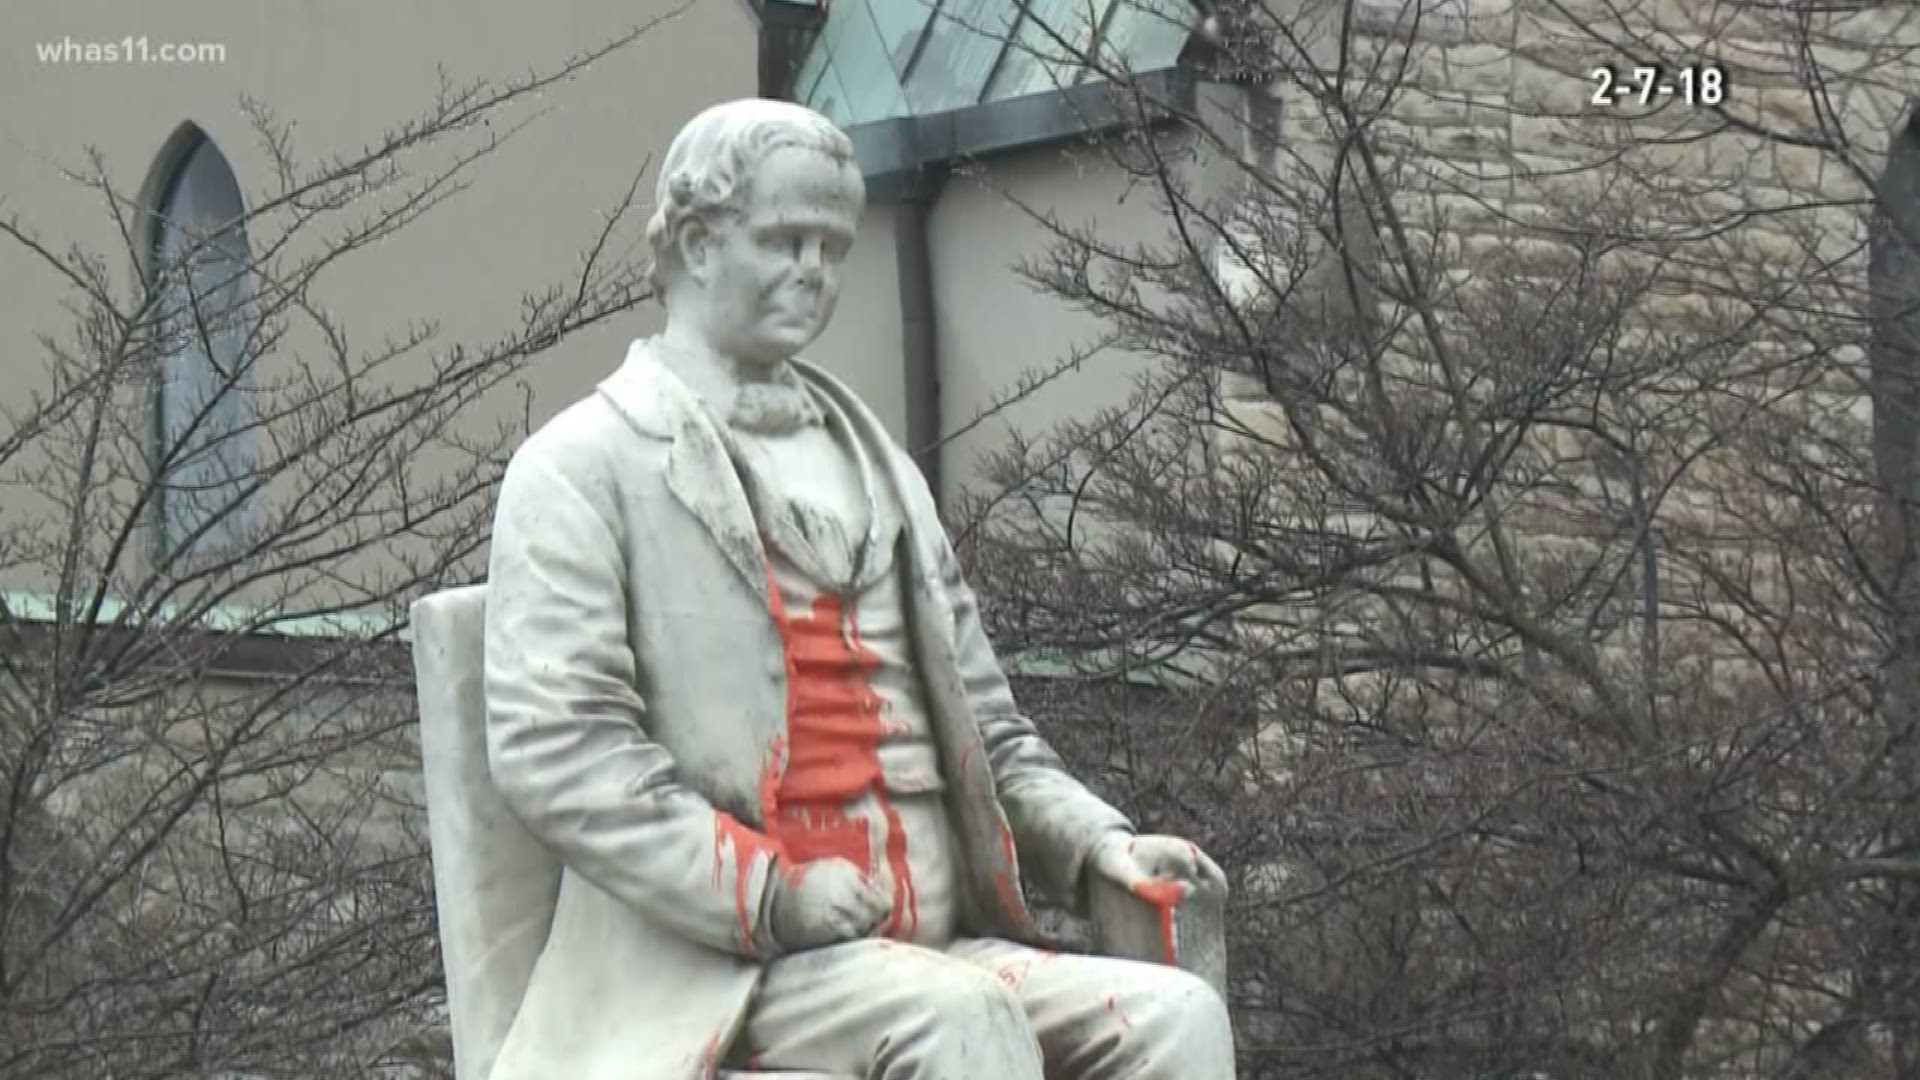 Proffitt Report Commentary: Louisville's Confederate statues